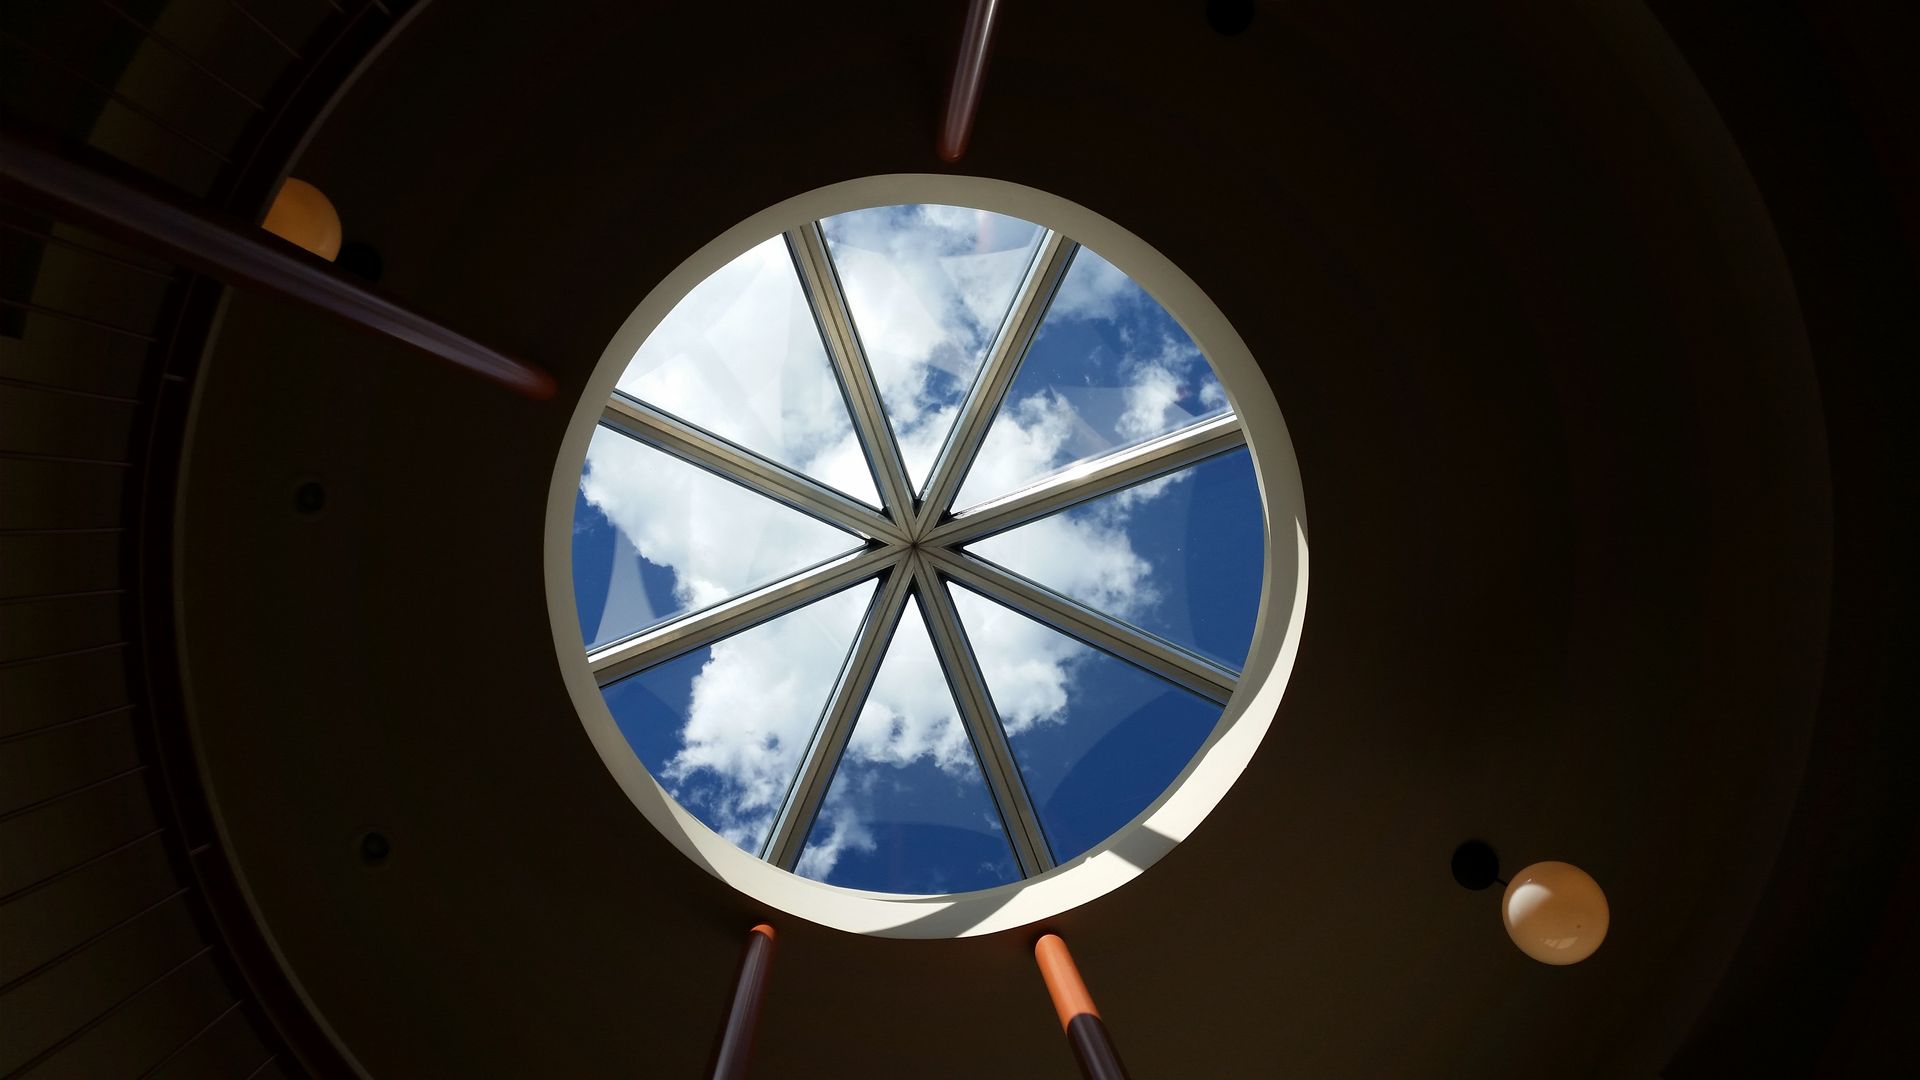 A circular skylight photographed from below.